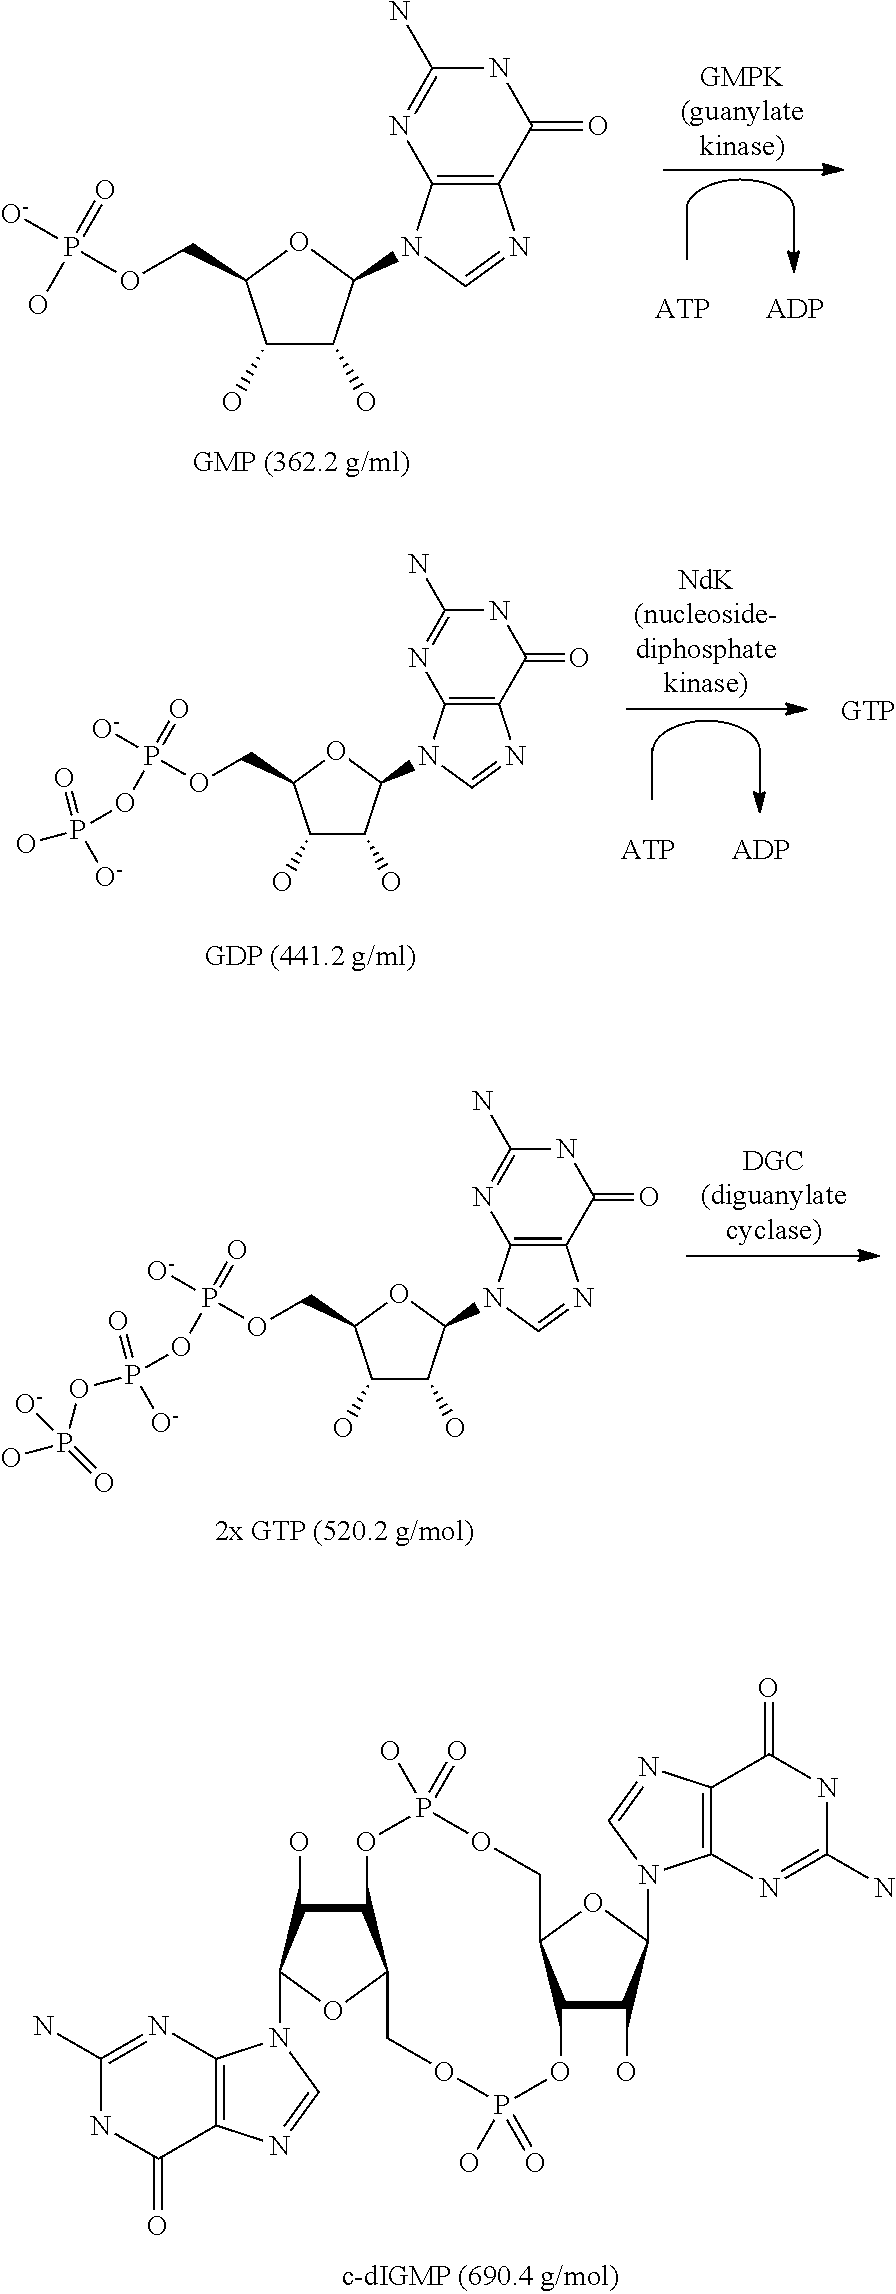 Process for the enzymatic production of cyclic diguanosine monophosphate employing a diguanylate cyclase comprising a mutated rxxd motif